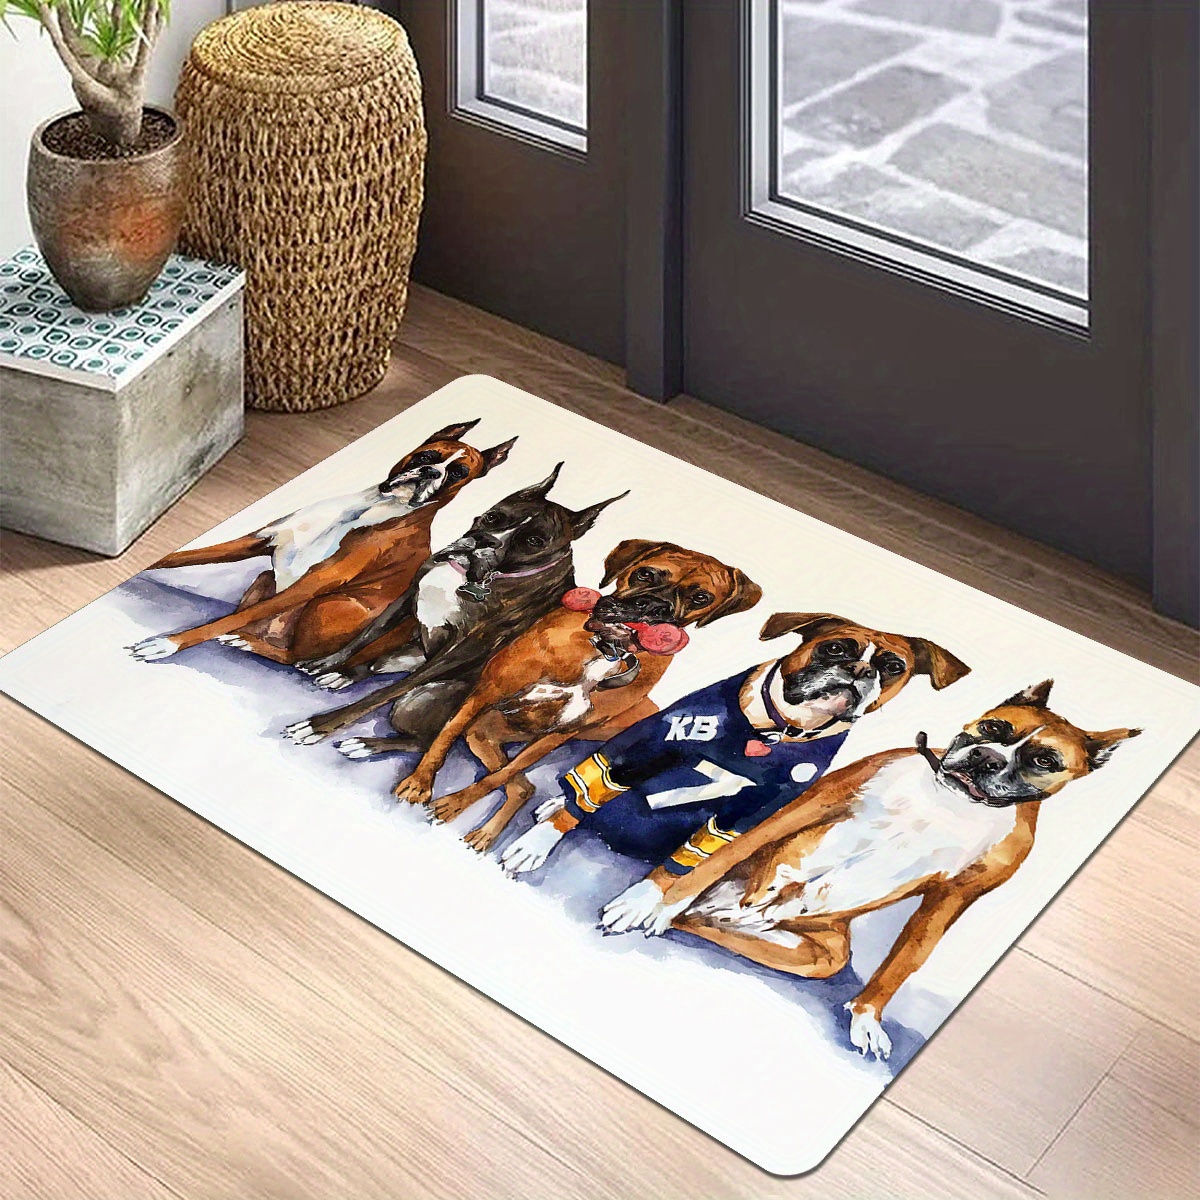 

1pc, Entrance Area Floor Mat, Dog Oil Painting Elements Printed Pattern Rug, Polyester Non-slip Stain Resistant Soft Floor Mat For Indoor Outdoor Entrance Floor Doormat Quick Drying Kitchen